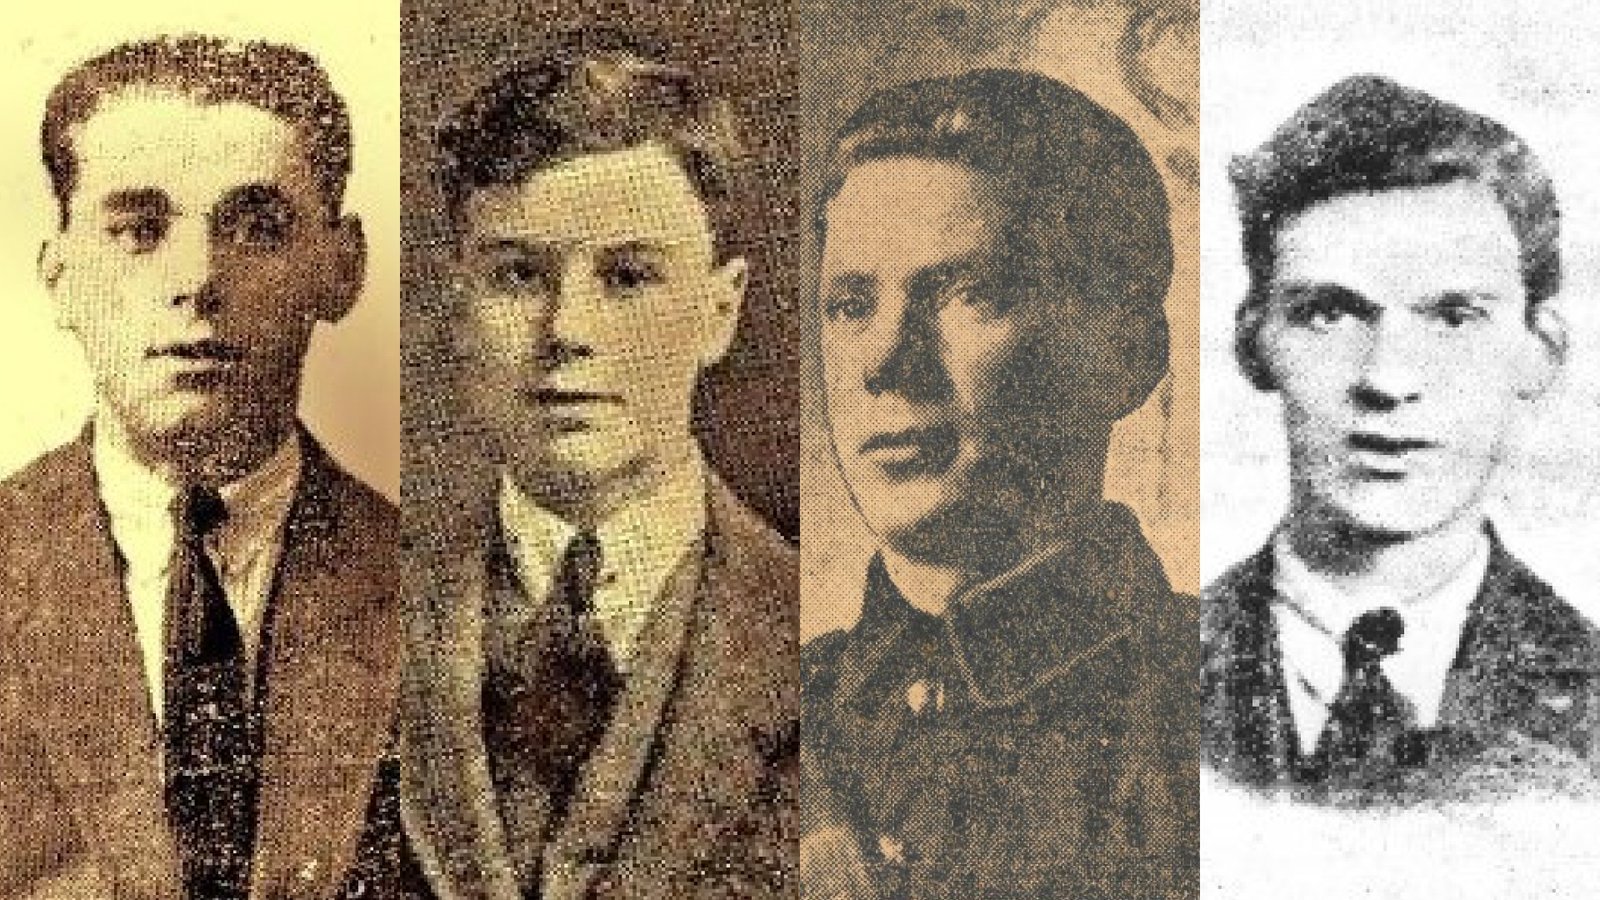 Image - Left to Right: Peter Cassidy, James Fisher, John Gaffney, Richard Twohig. All four young men were executed on 17th of November, 1922 for possession of arms. Image courtesy of Kilmainham Gaol Museum/OPW